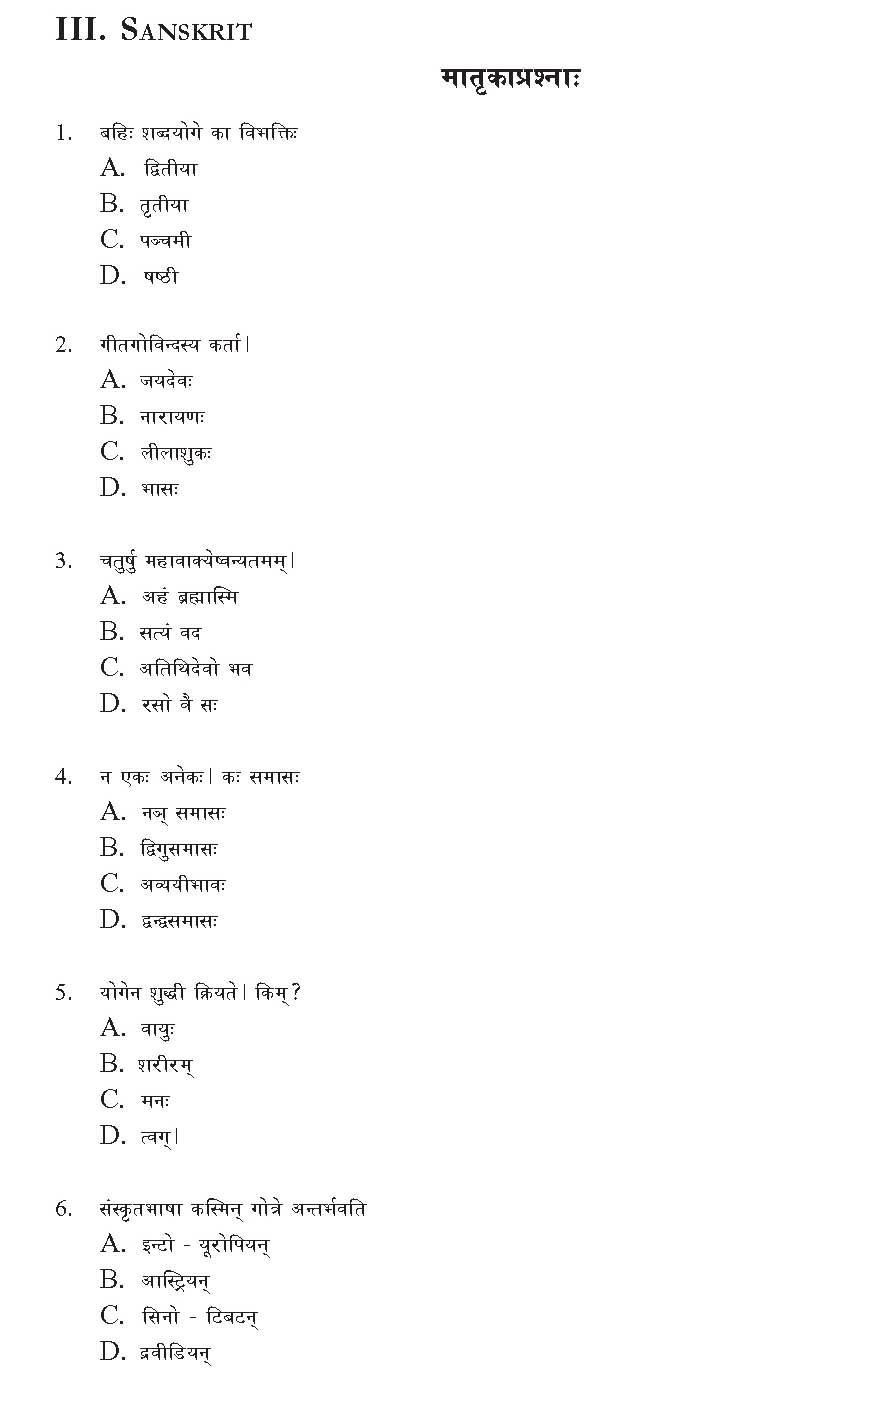 KTET Category IV Sanskrit Sample Question Paper with Answers 2012 1